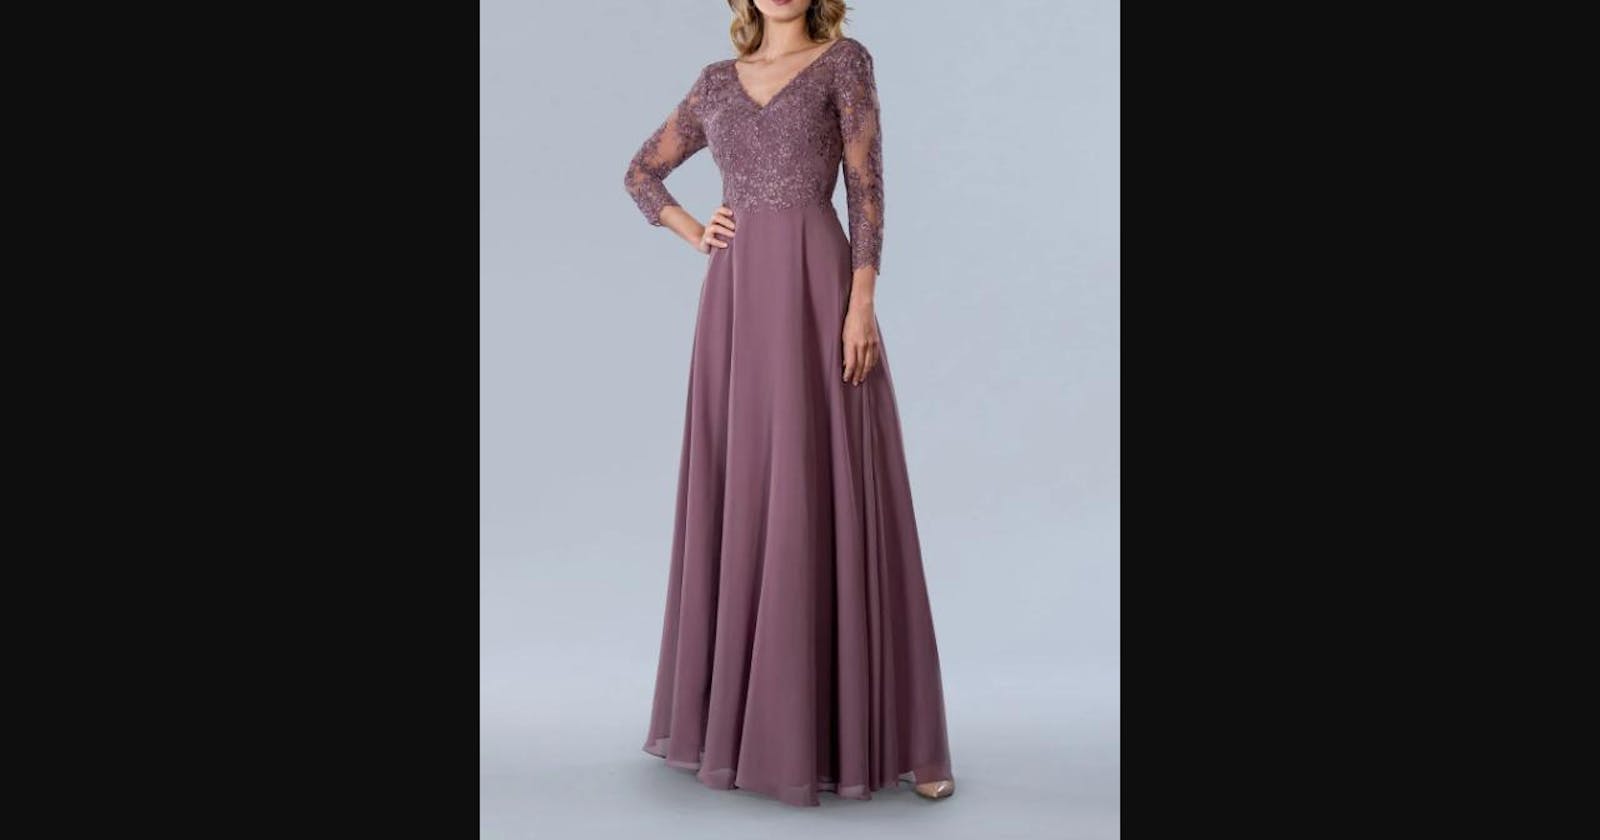 Explore the mother of the bride dresses at formaldressshops